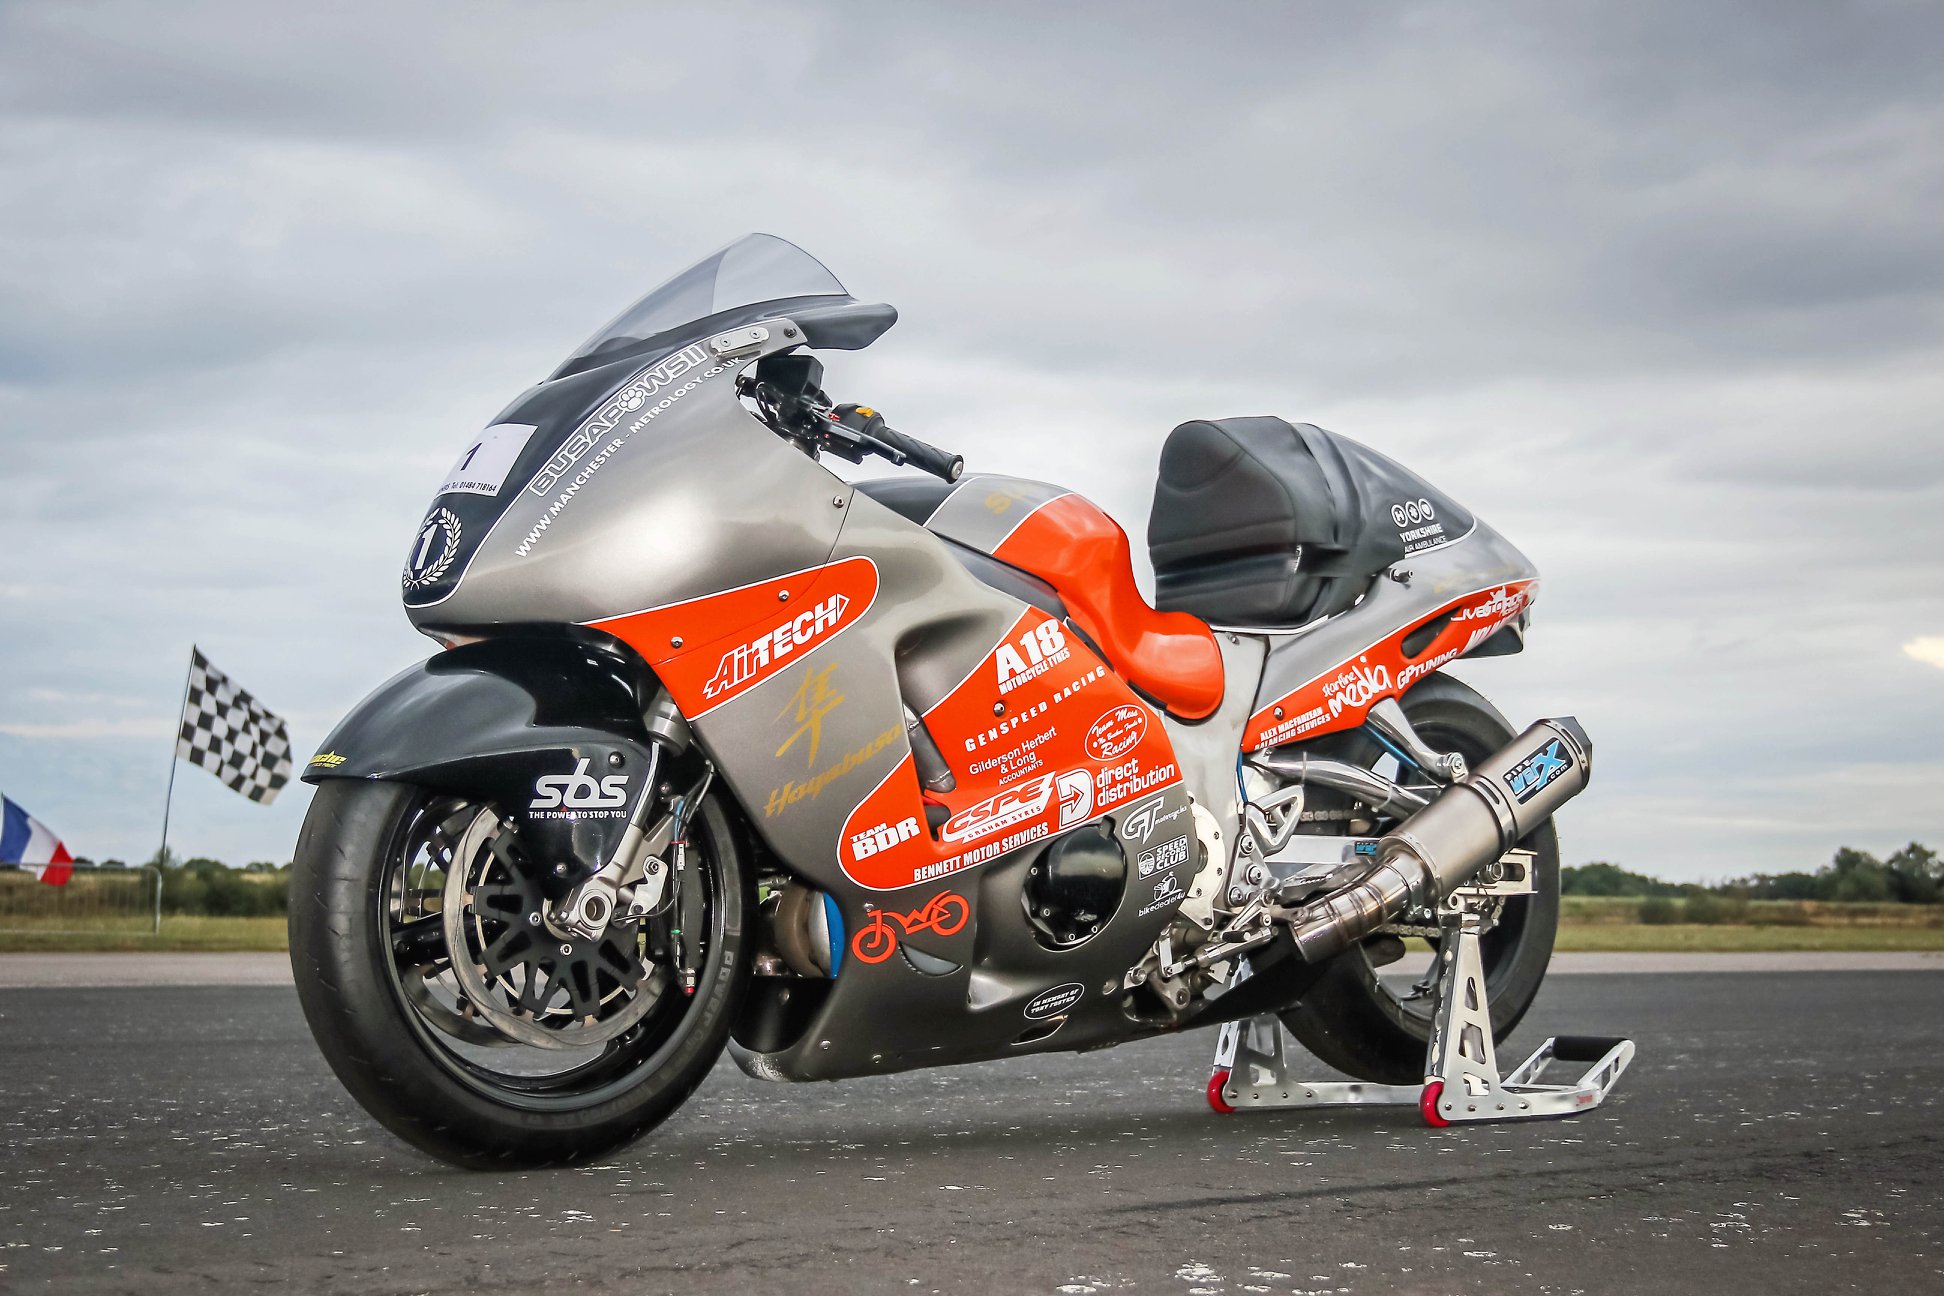 Turbocharged Hayabusa For Sale 650hp 264mph Drivemag Riders